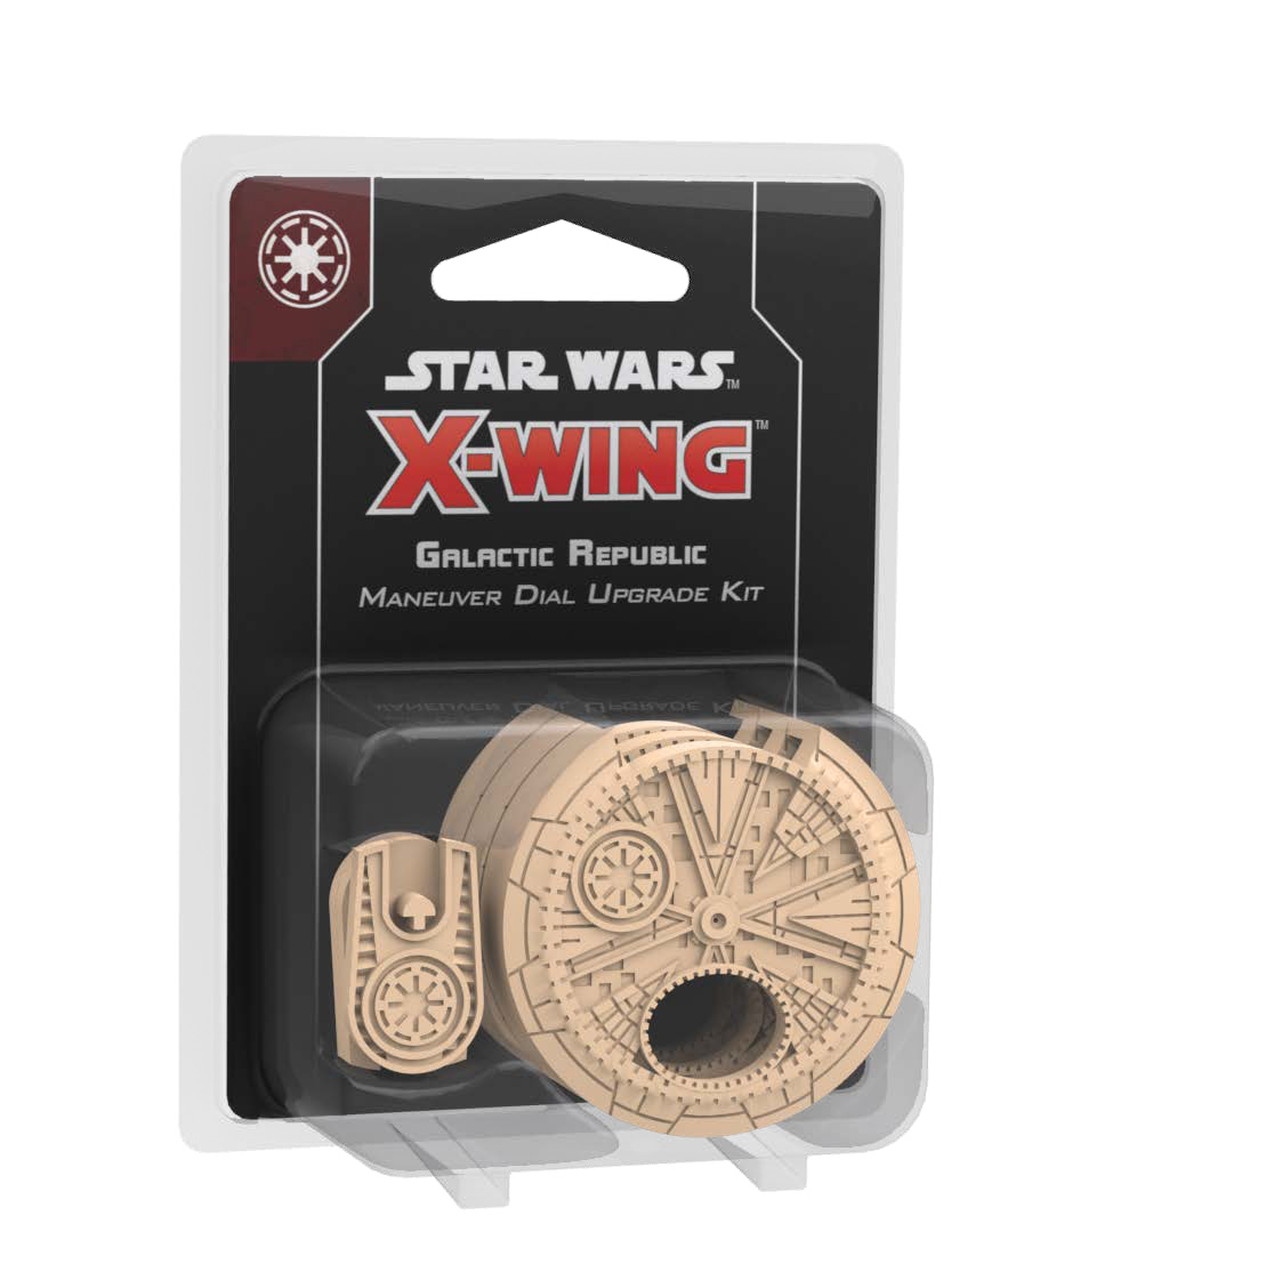 Star Wars: X-Wing 2nd Edition - Galactic Republic Maneuver Dial